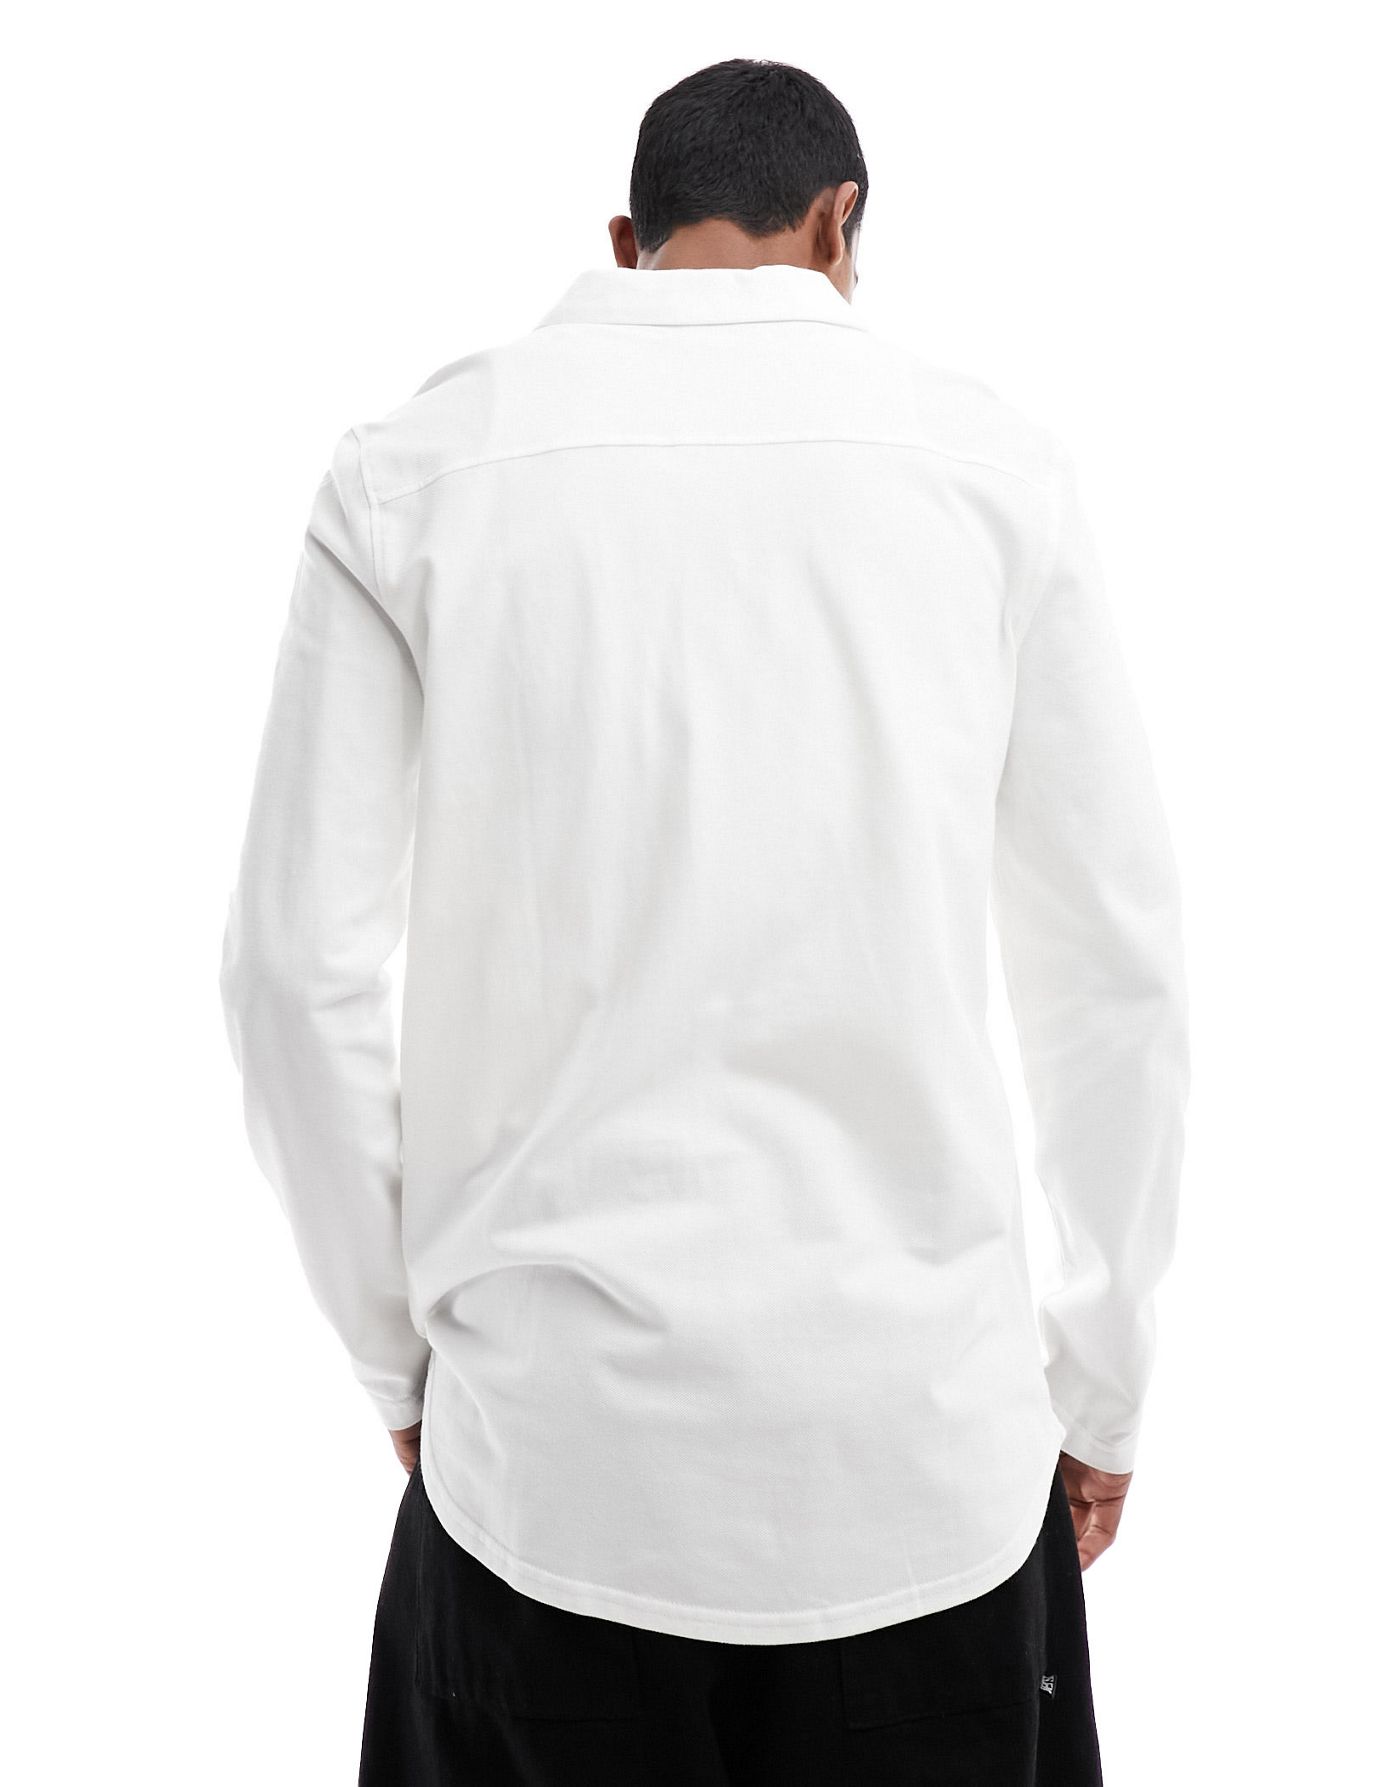 River Island long sleeved pique jersey shirt in white 